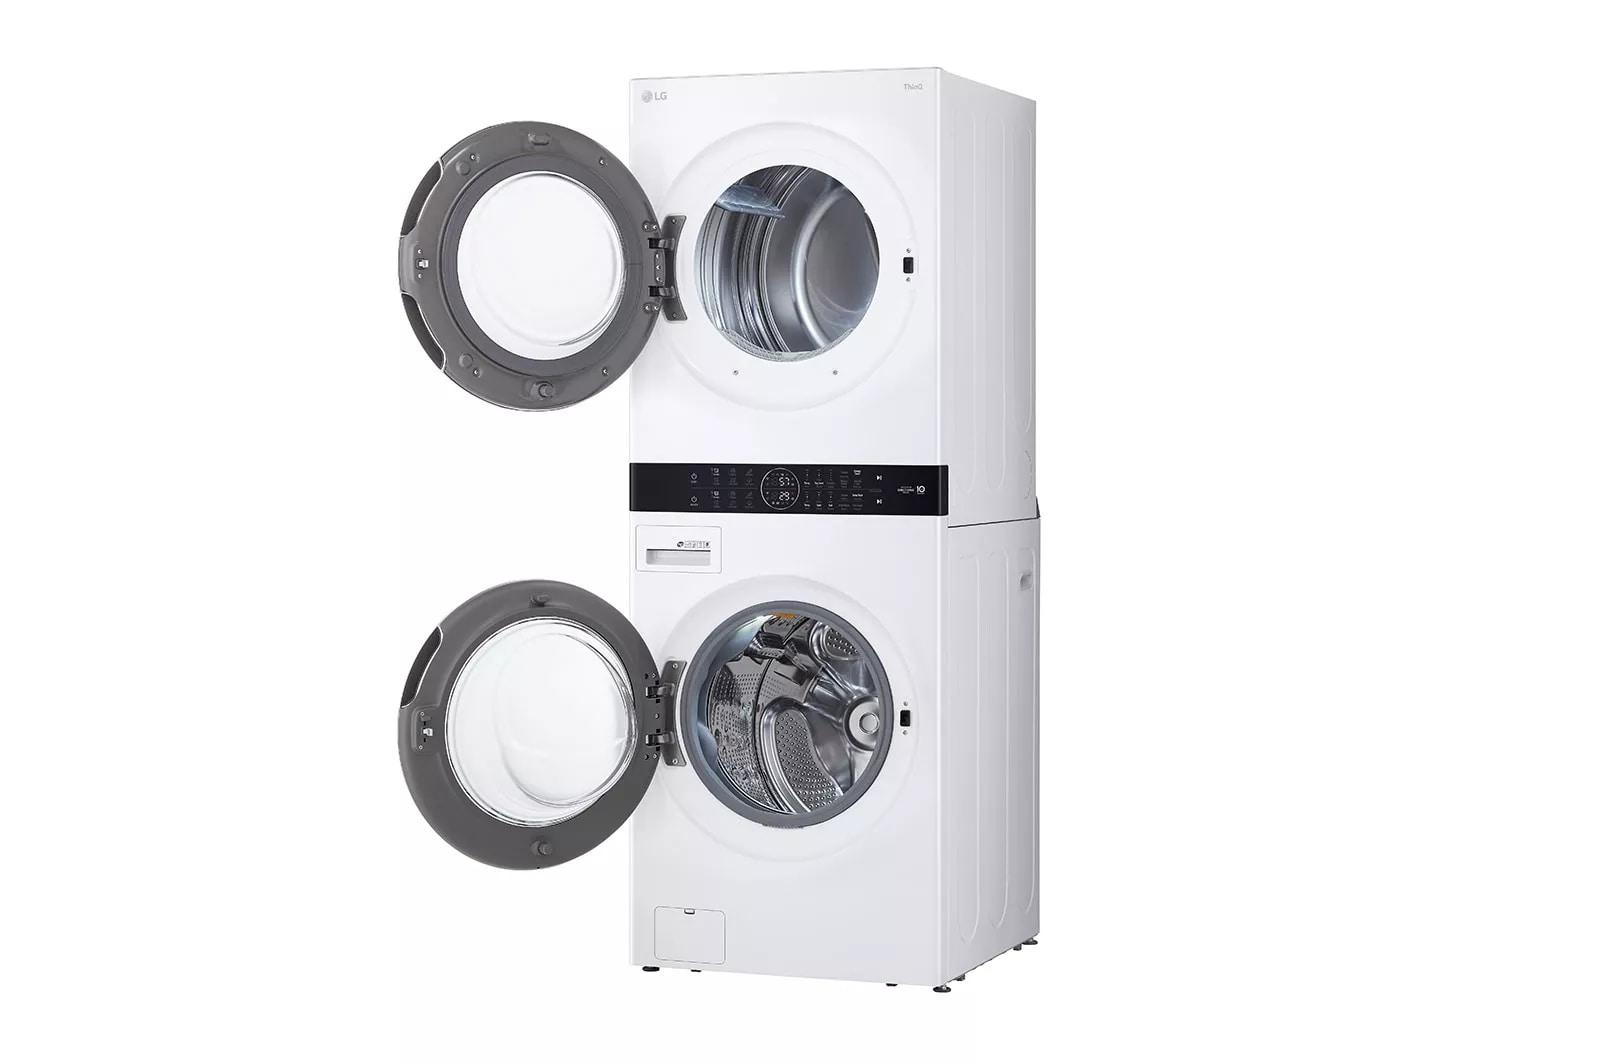 LG Electric Washer Tower - image 5 of 6